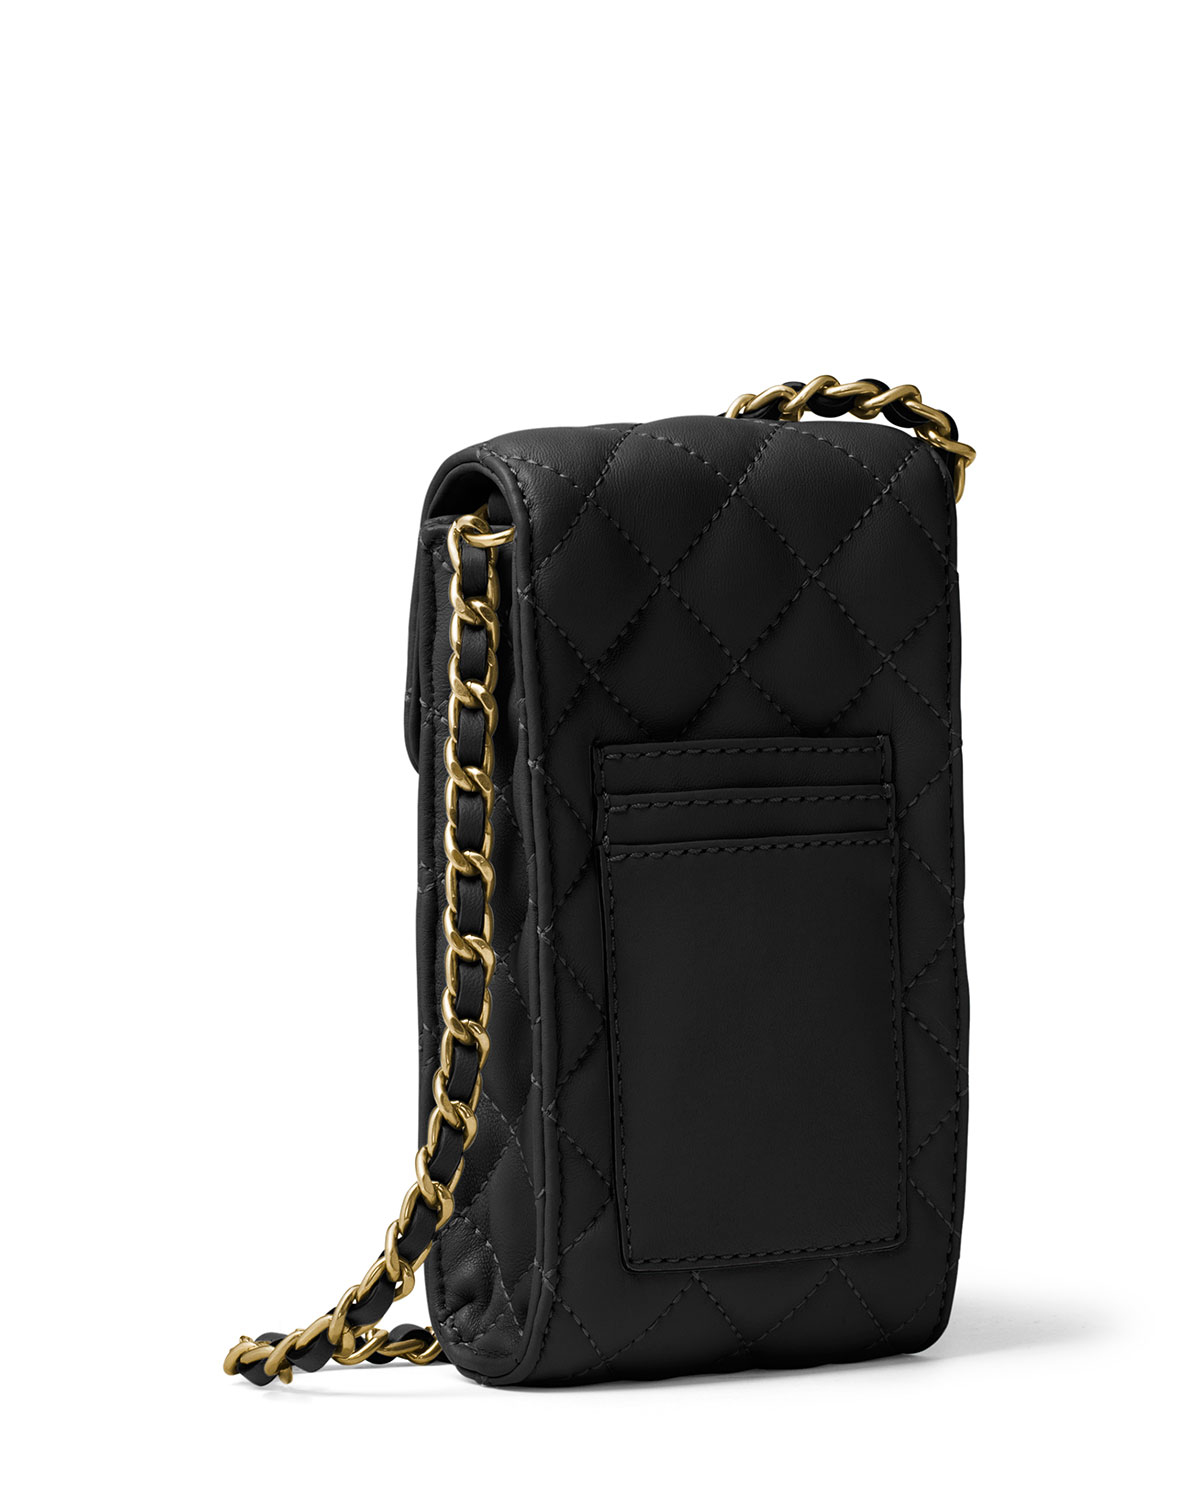 Lyst - Michael Michael Kors Sloan Phone Quilted Chain Crossbody Bag in Black